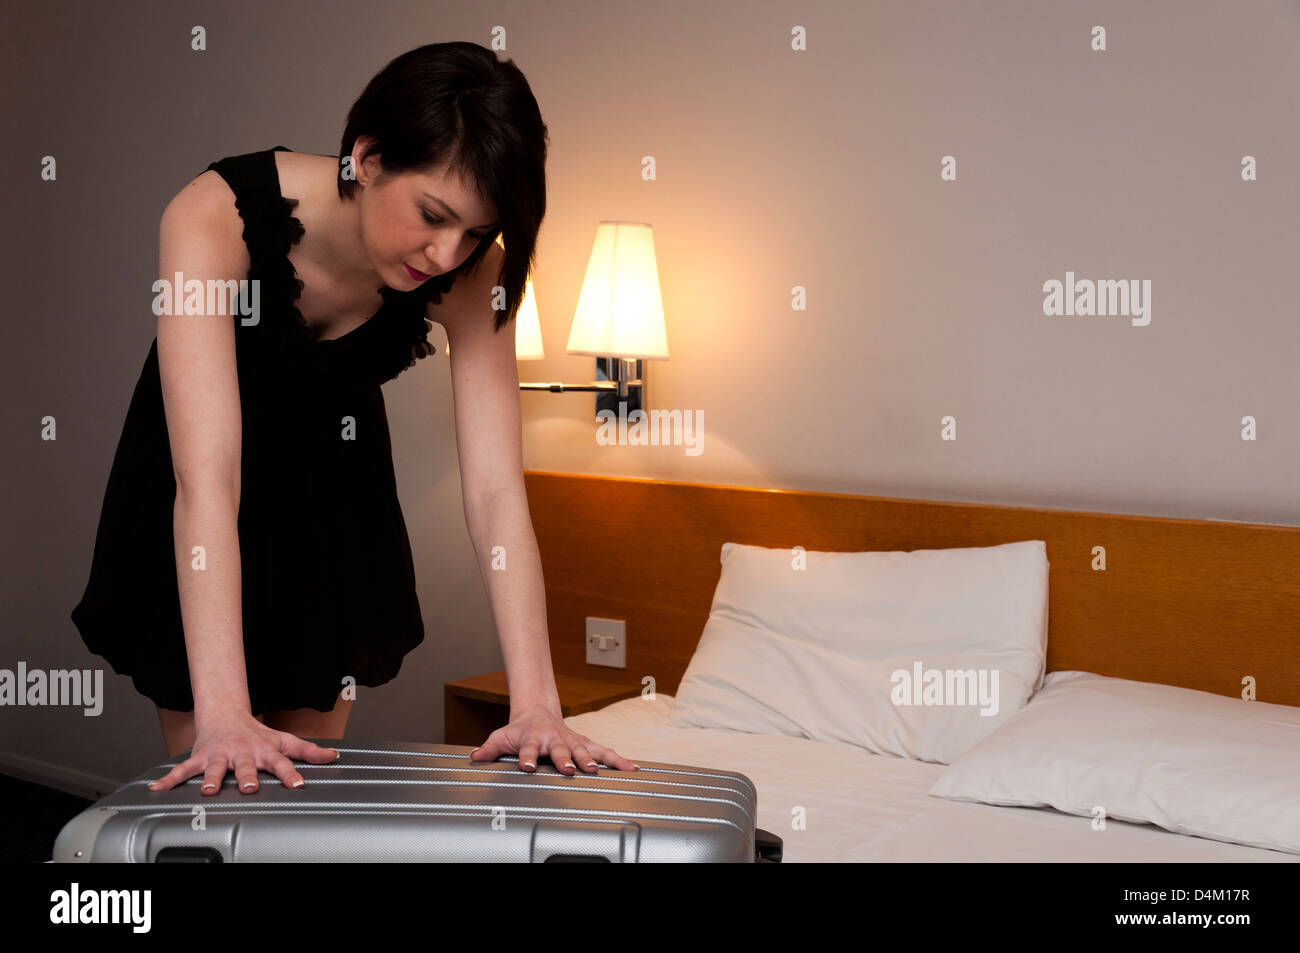 Woman packing suitcase in hotel room Stock Photo